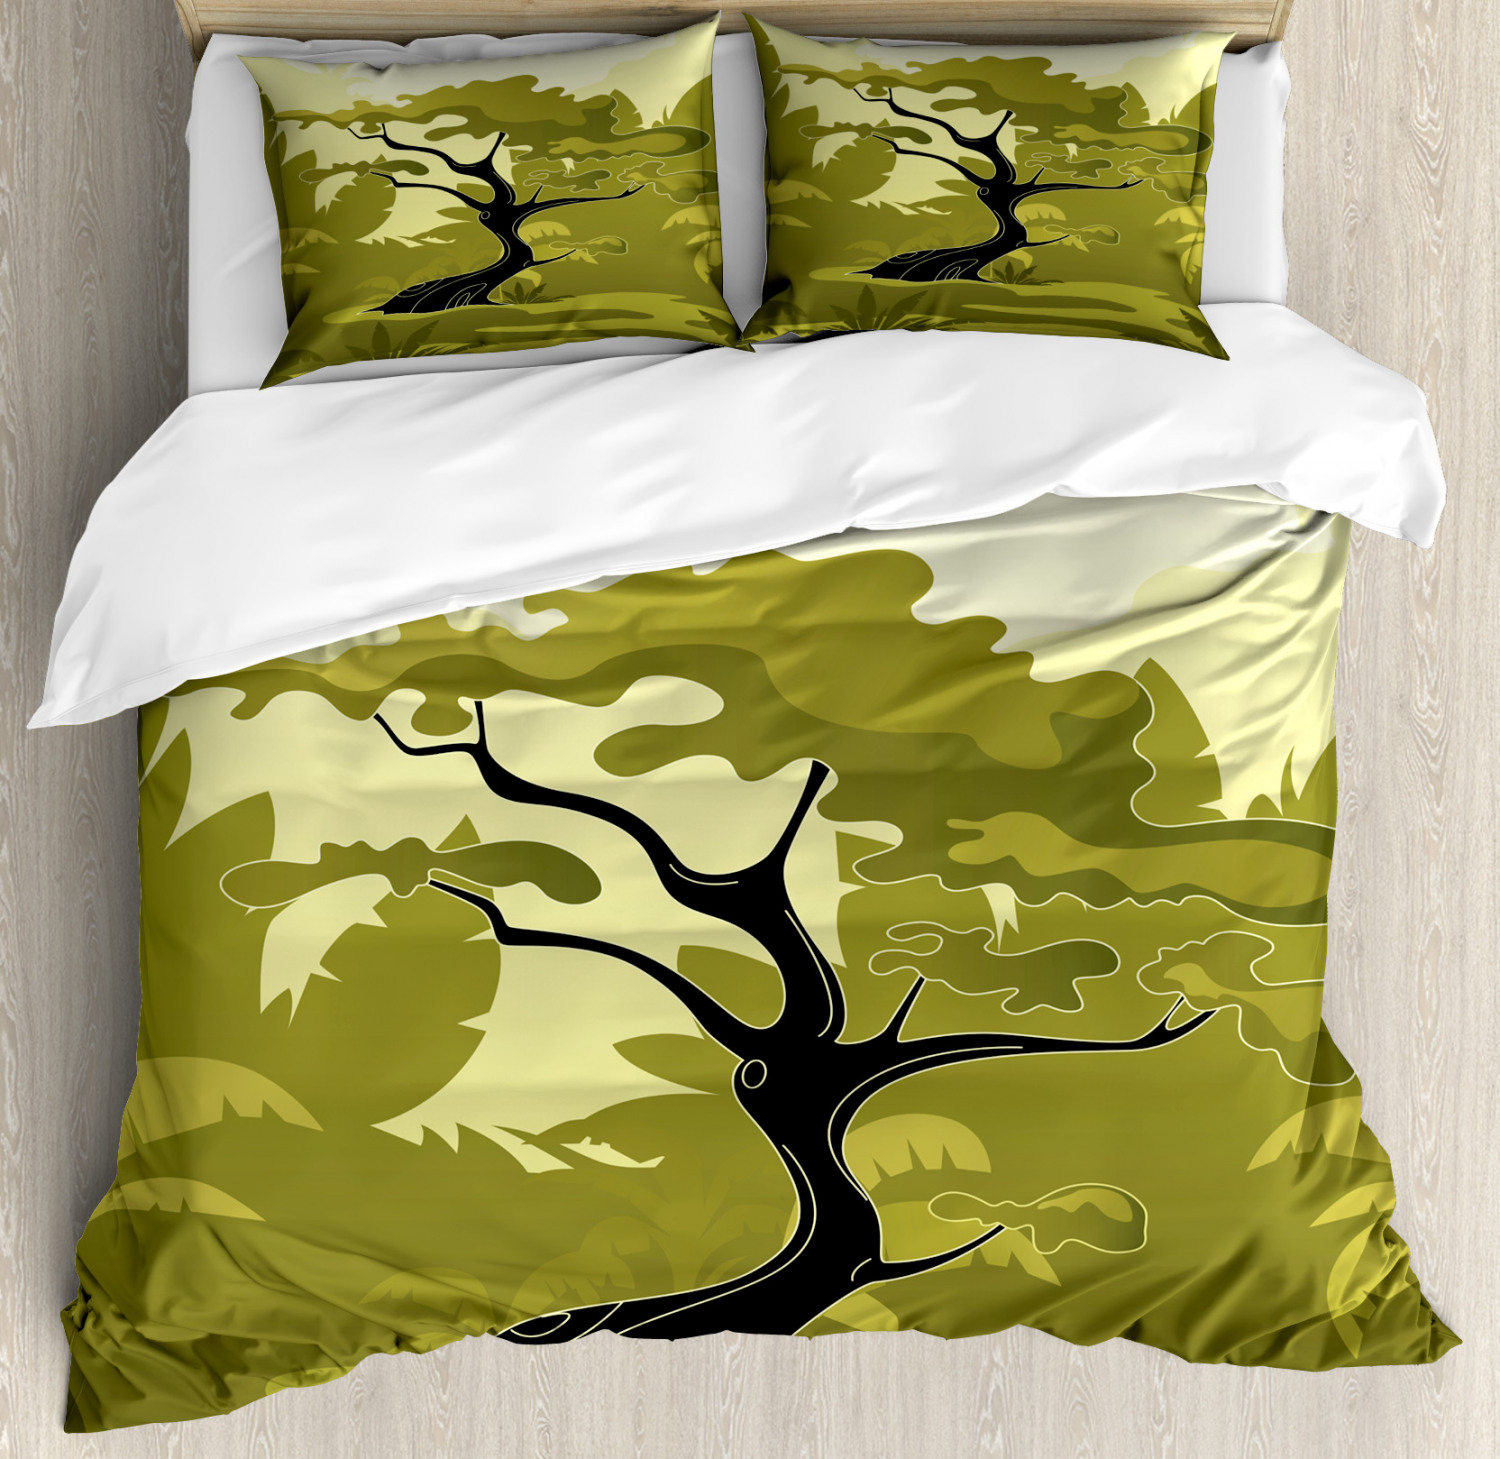 Olive Green Duvet Cover Set With Pillow Shams Japanese Jungle